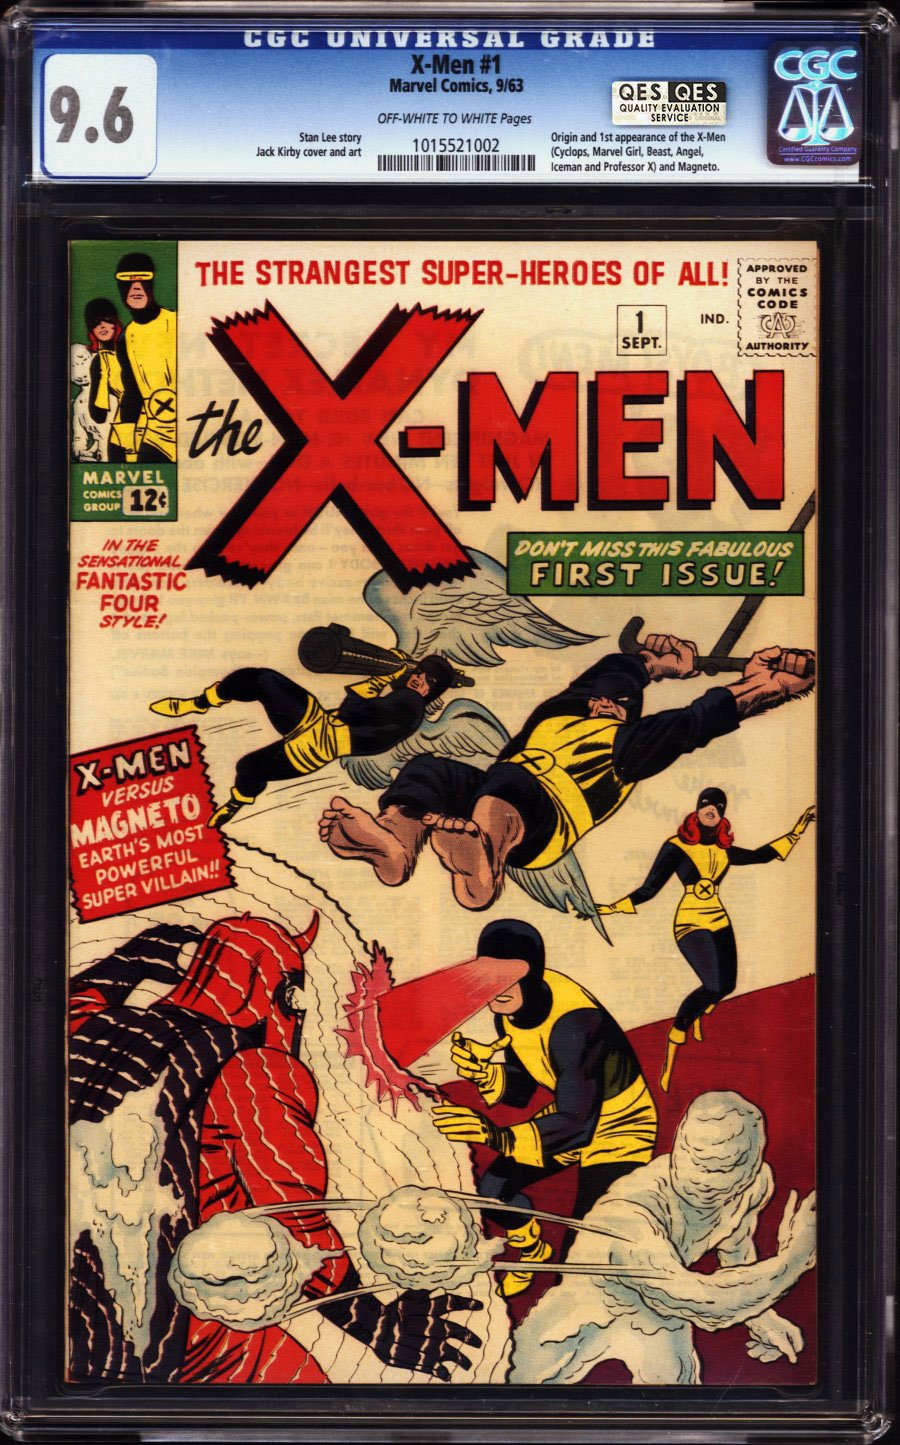 most-expensive-comic-book-6